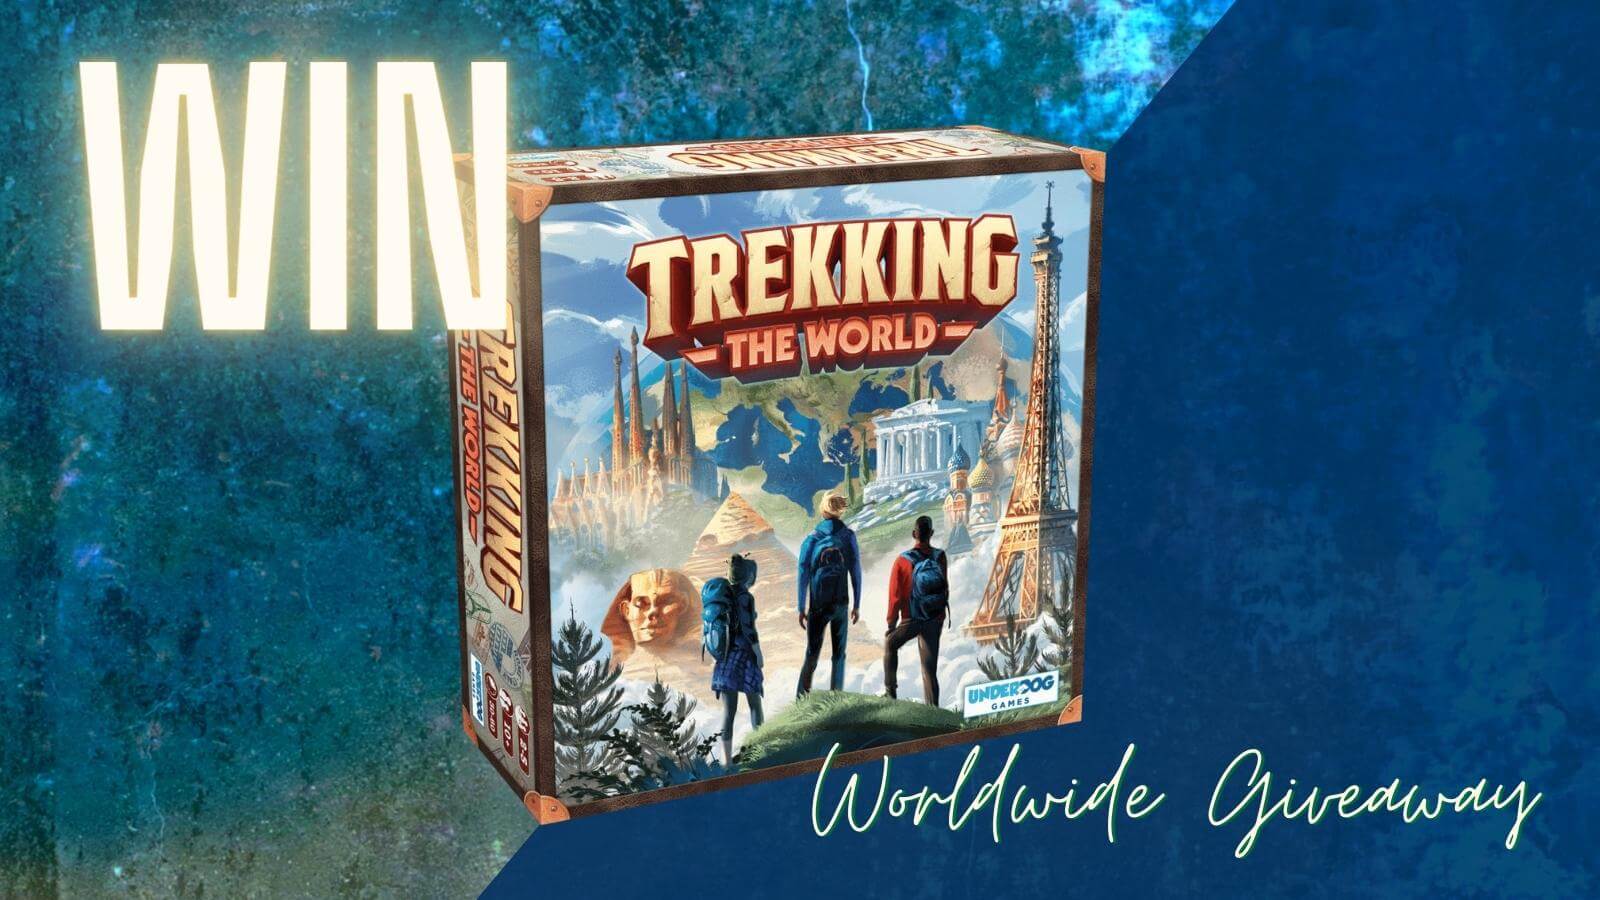 *Competition Closed* Win a Copy of Trekking the World!